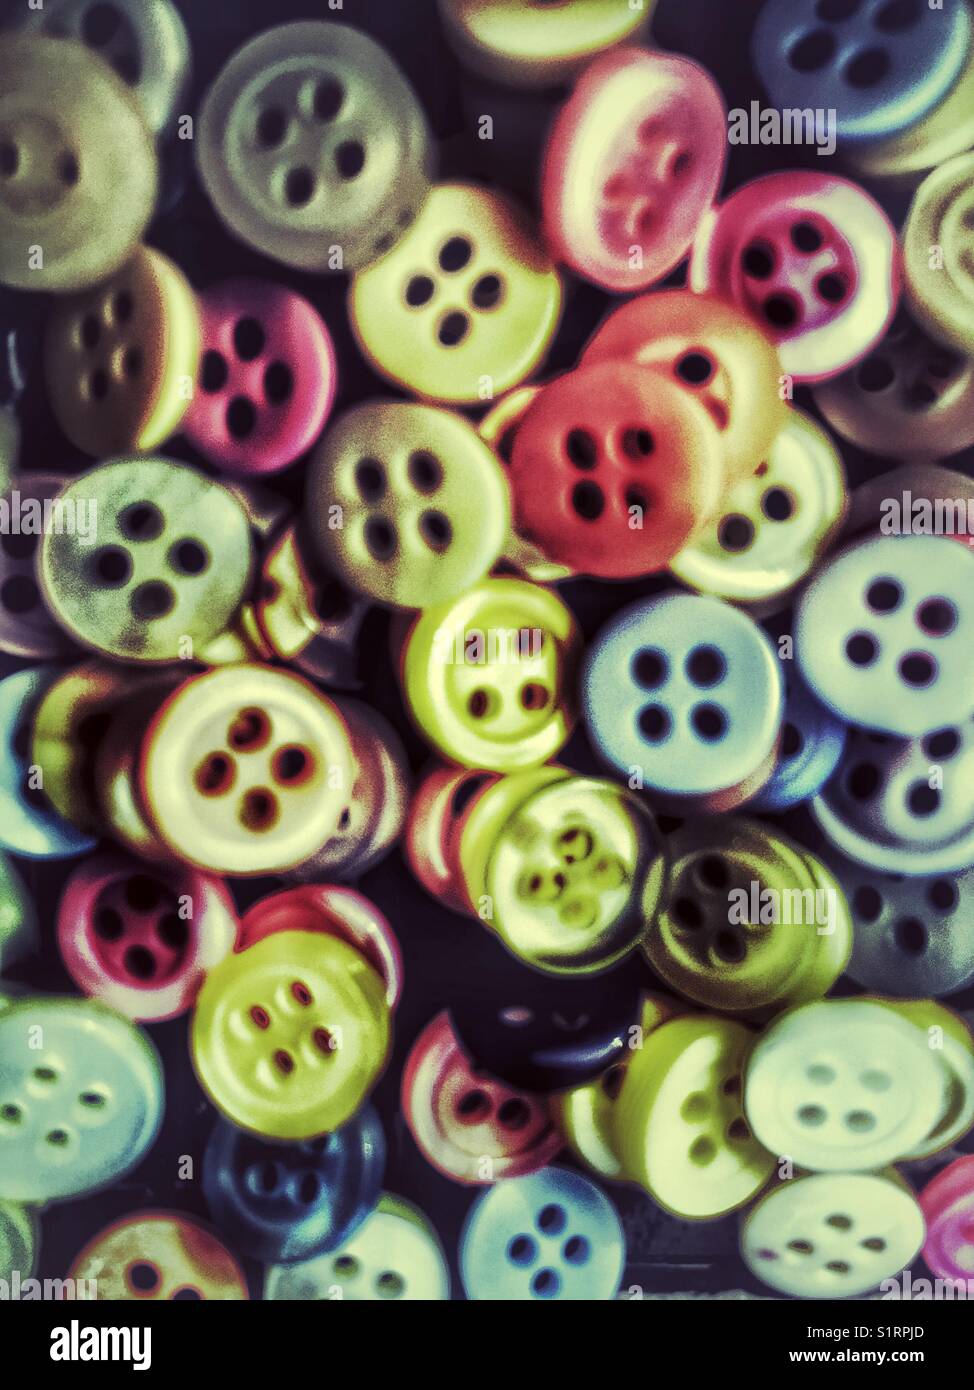 Heaps of colourful buttons, background. Stock Photo